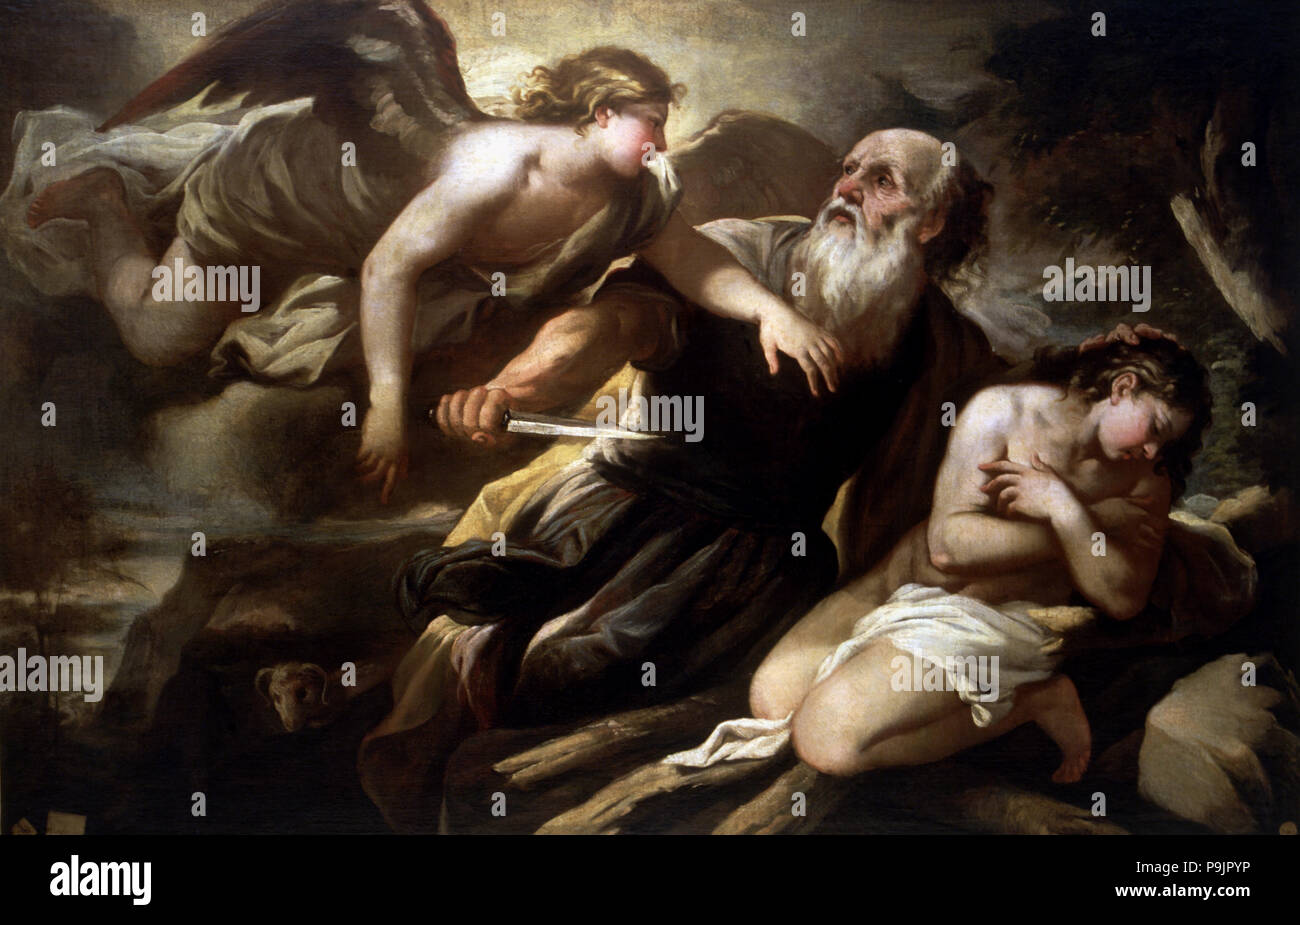 The Sacrifice of Isaac', oil on canvas, the Hebrew patriarch Abraham is interrupted by the angel … Stock Photo